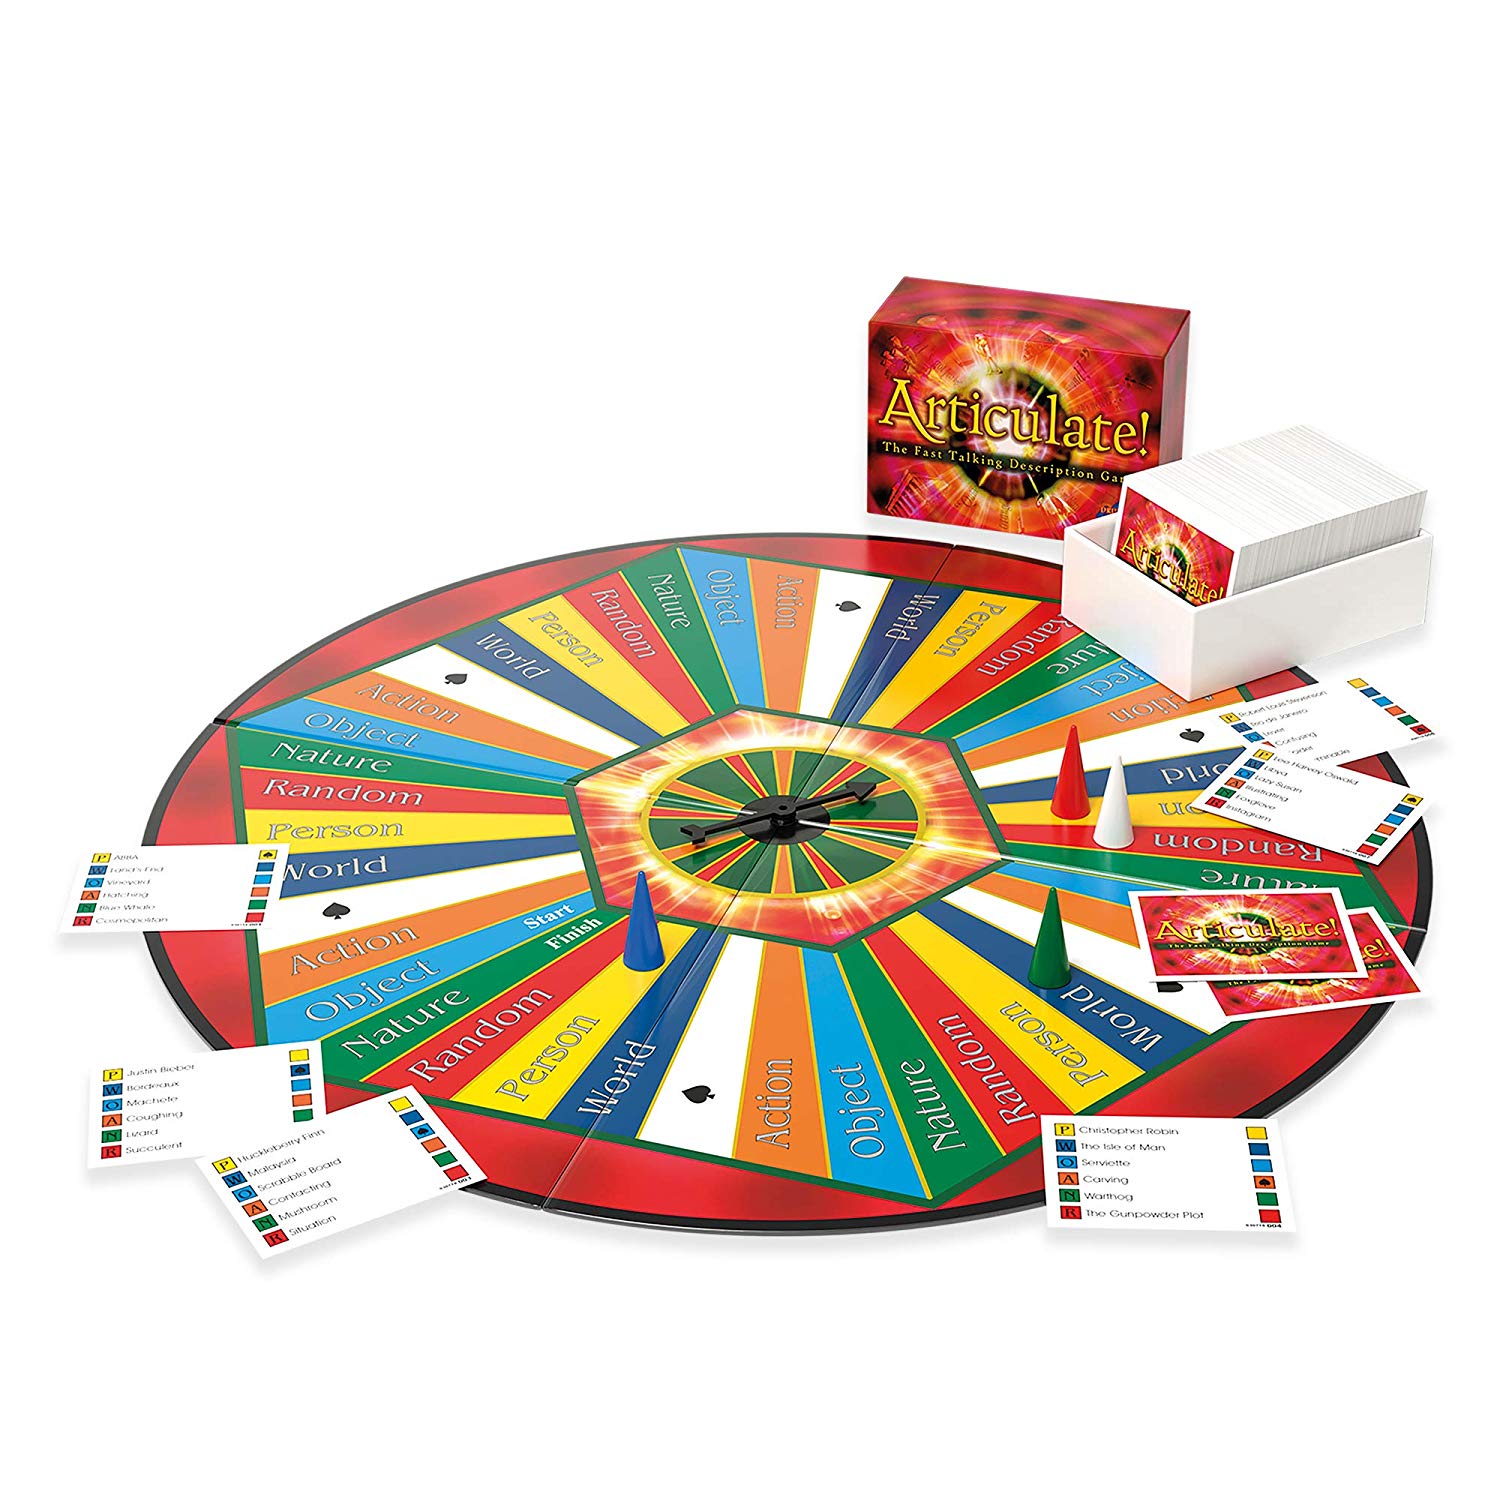 100% Complete Great Family Game Articulate board game Drummond Park 